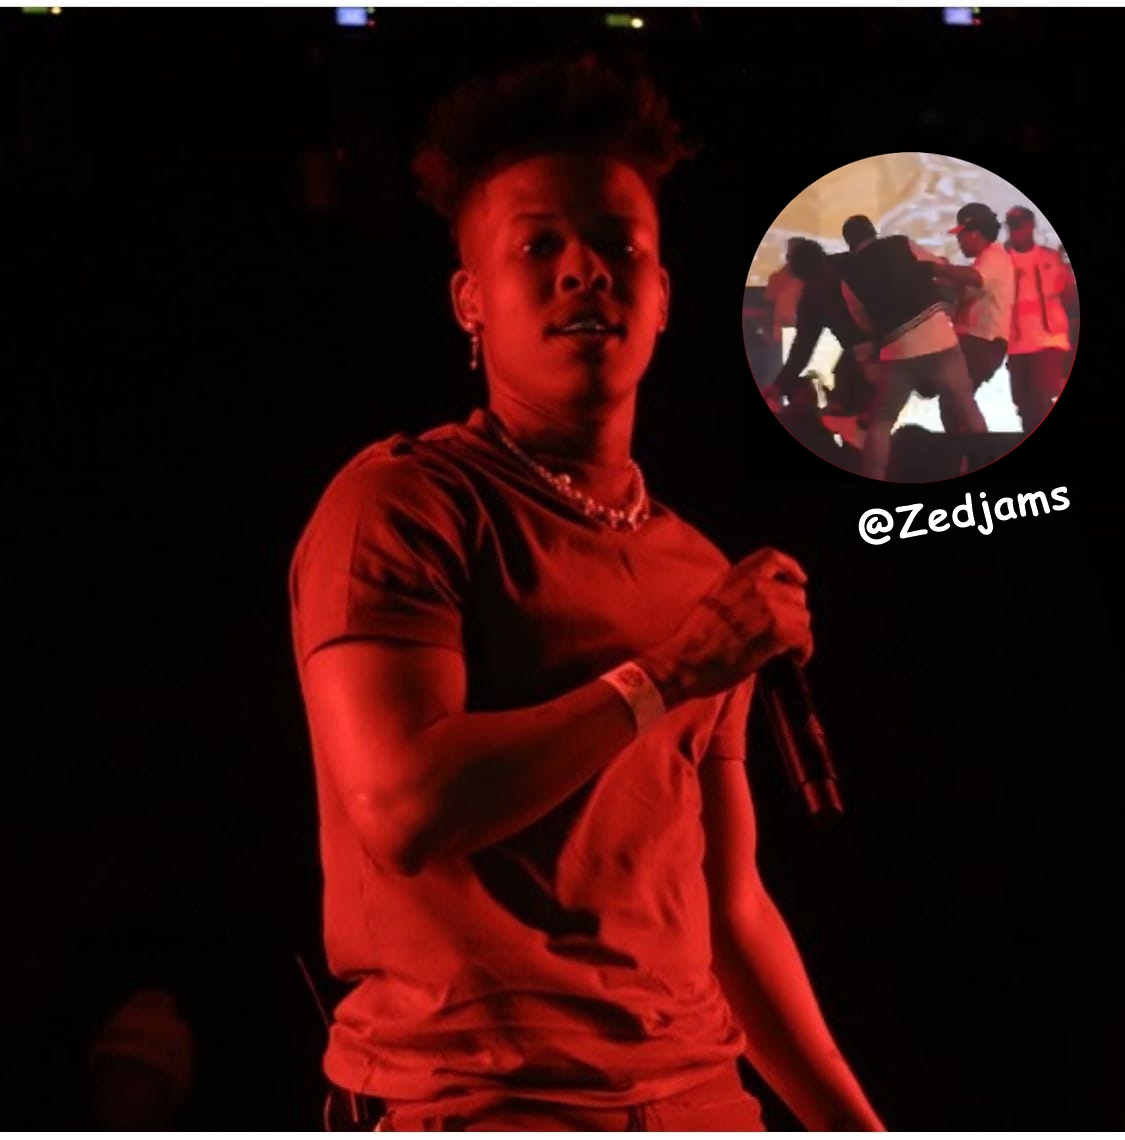 South Africa Rapper Nasty C Punches & Kicks Fan On Stage In Zambia